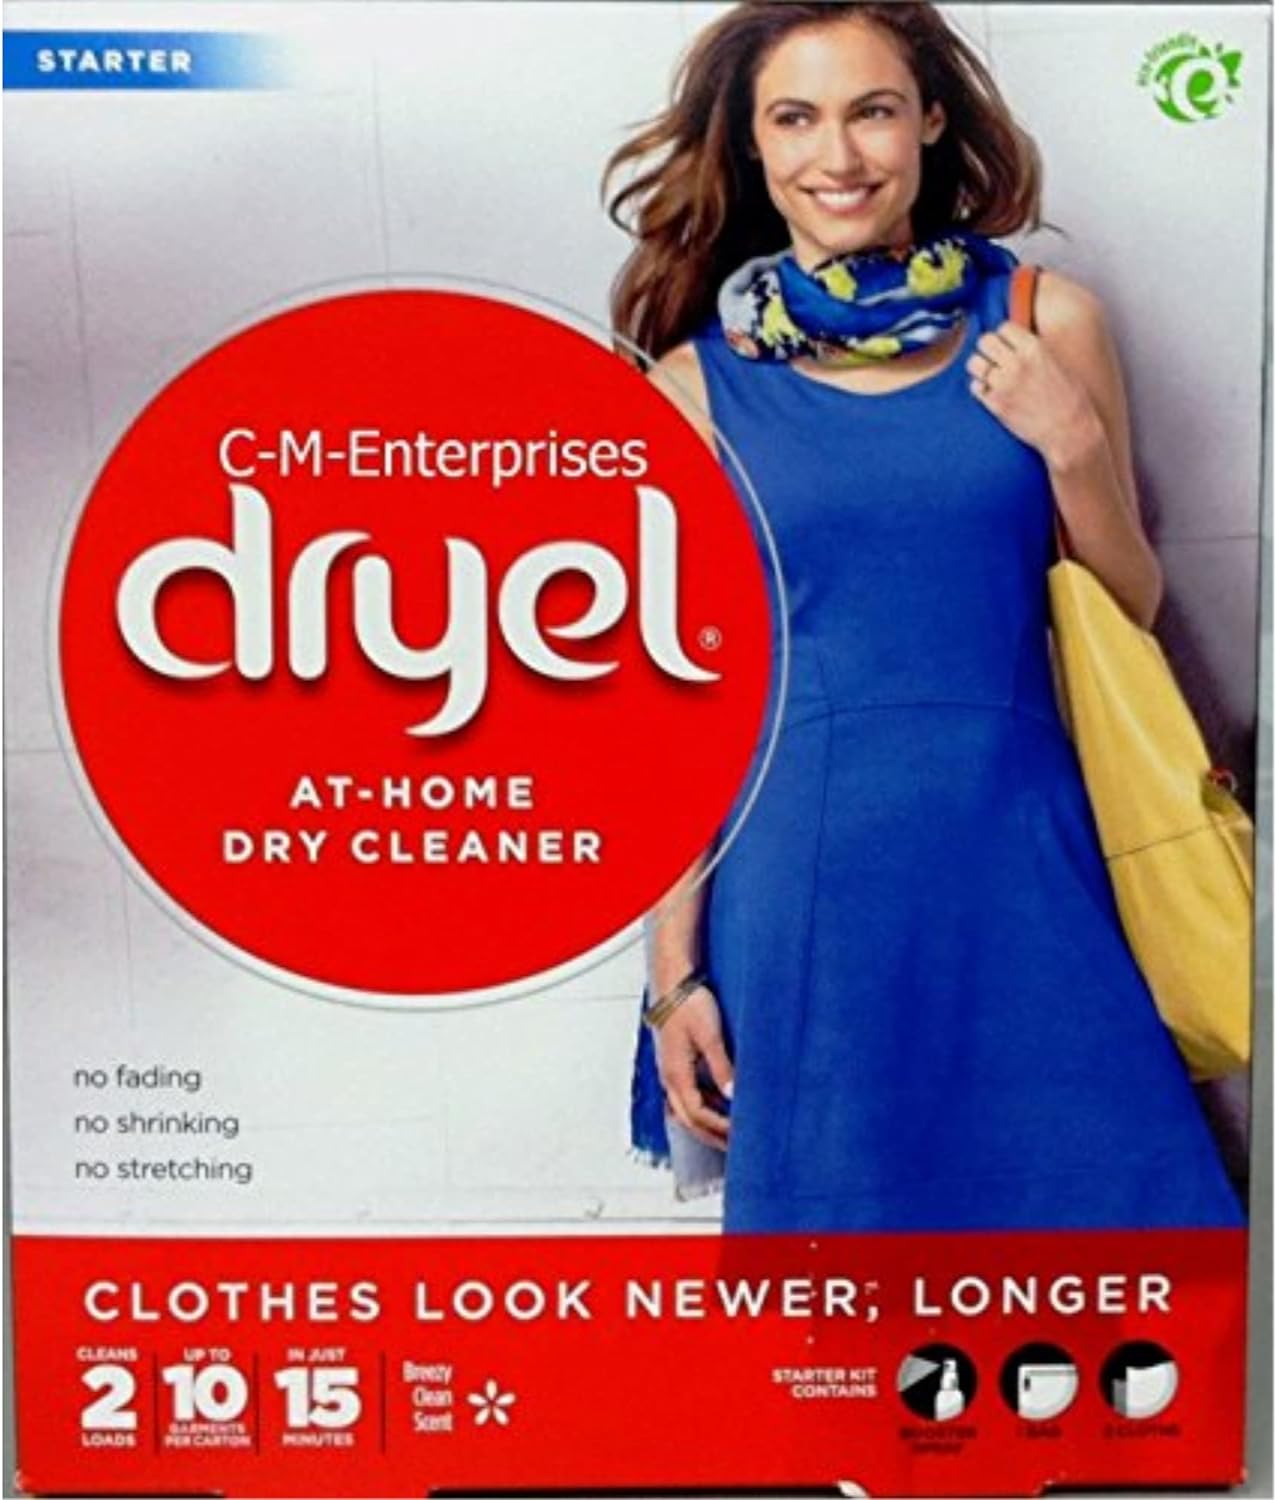 dryel At-Home Dry Cleaner Starter Kit, Gentle Laundry Care for Special Fabrics and Dry-Clean-Only Clothes, 2 Load Capacity